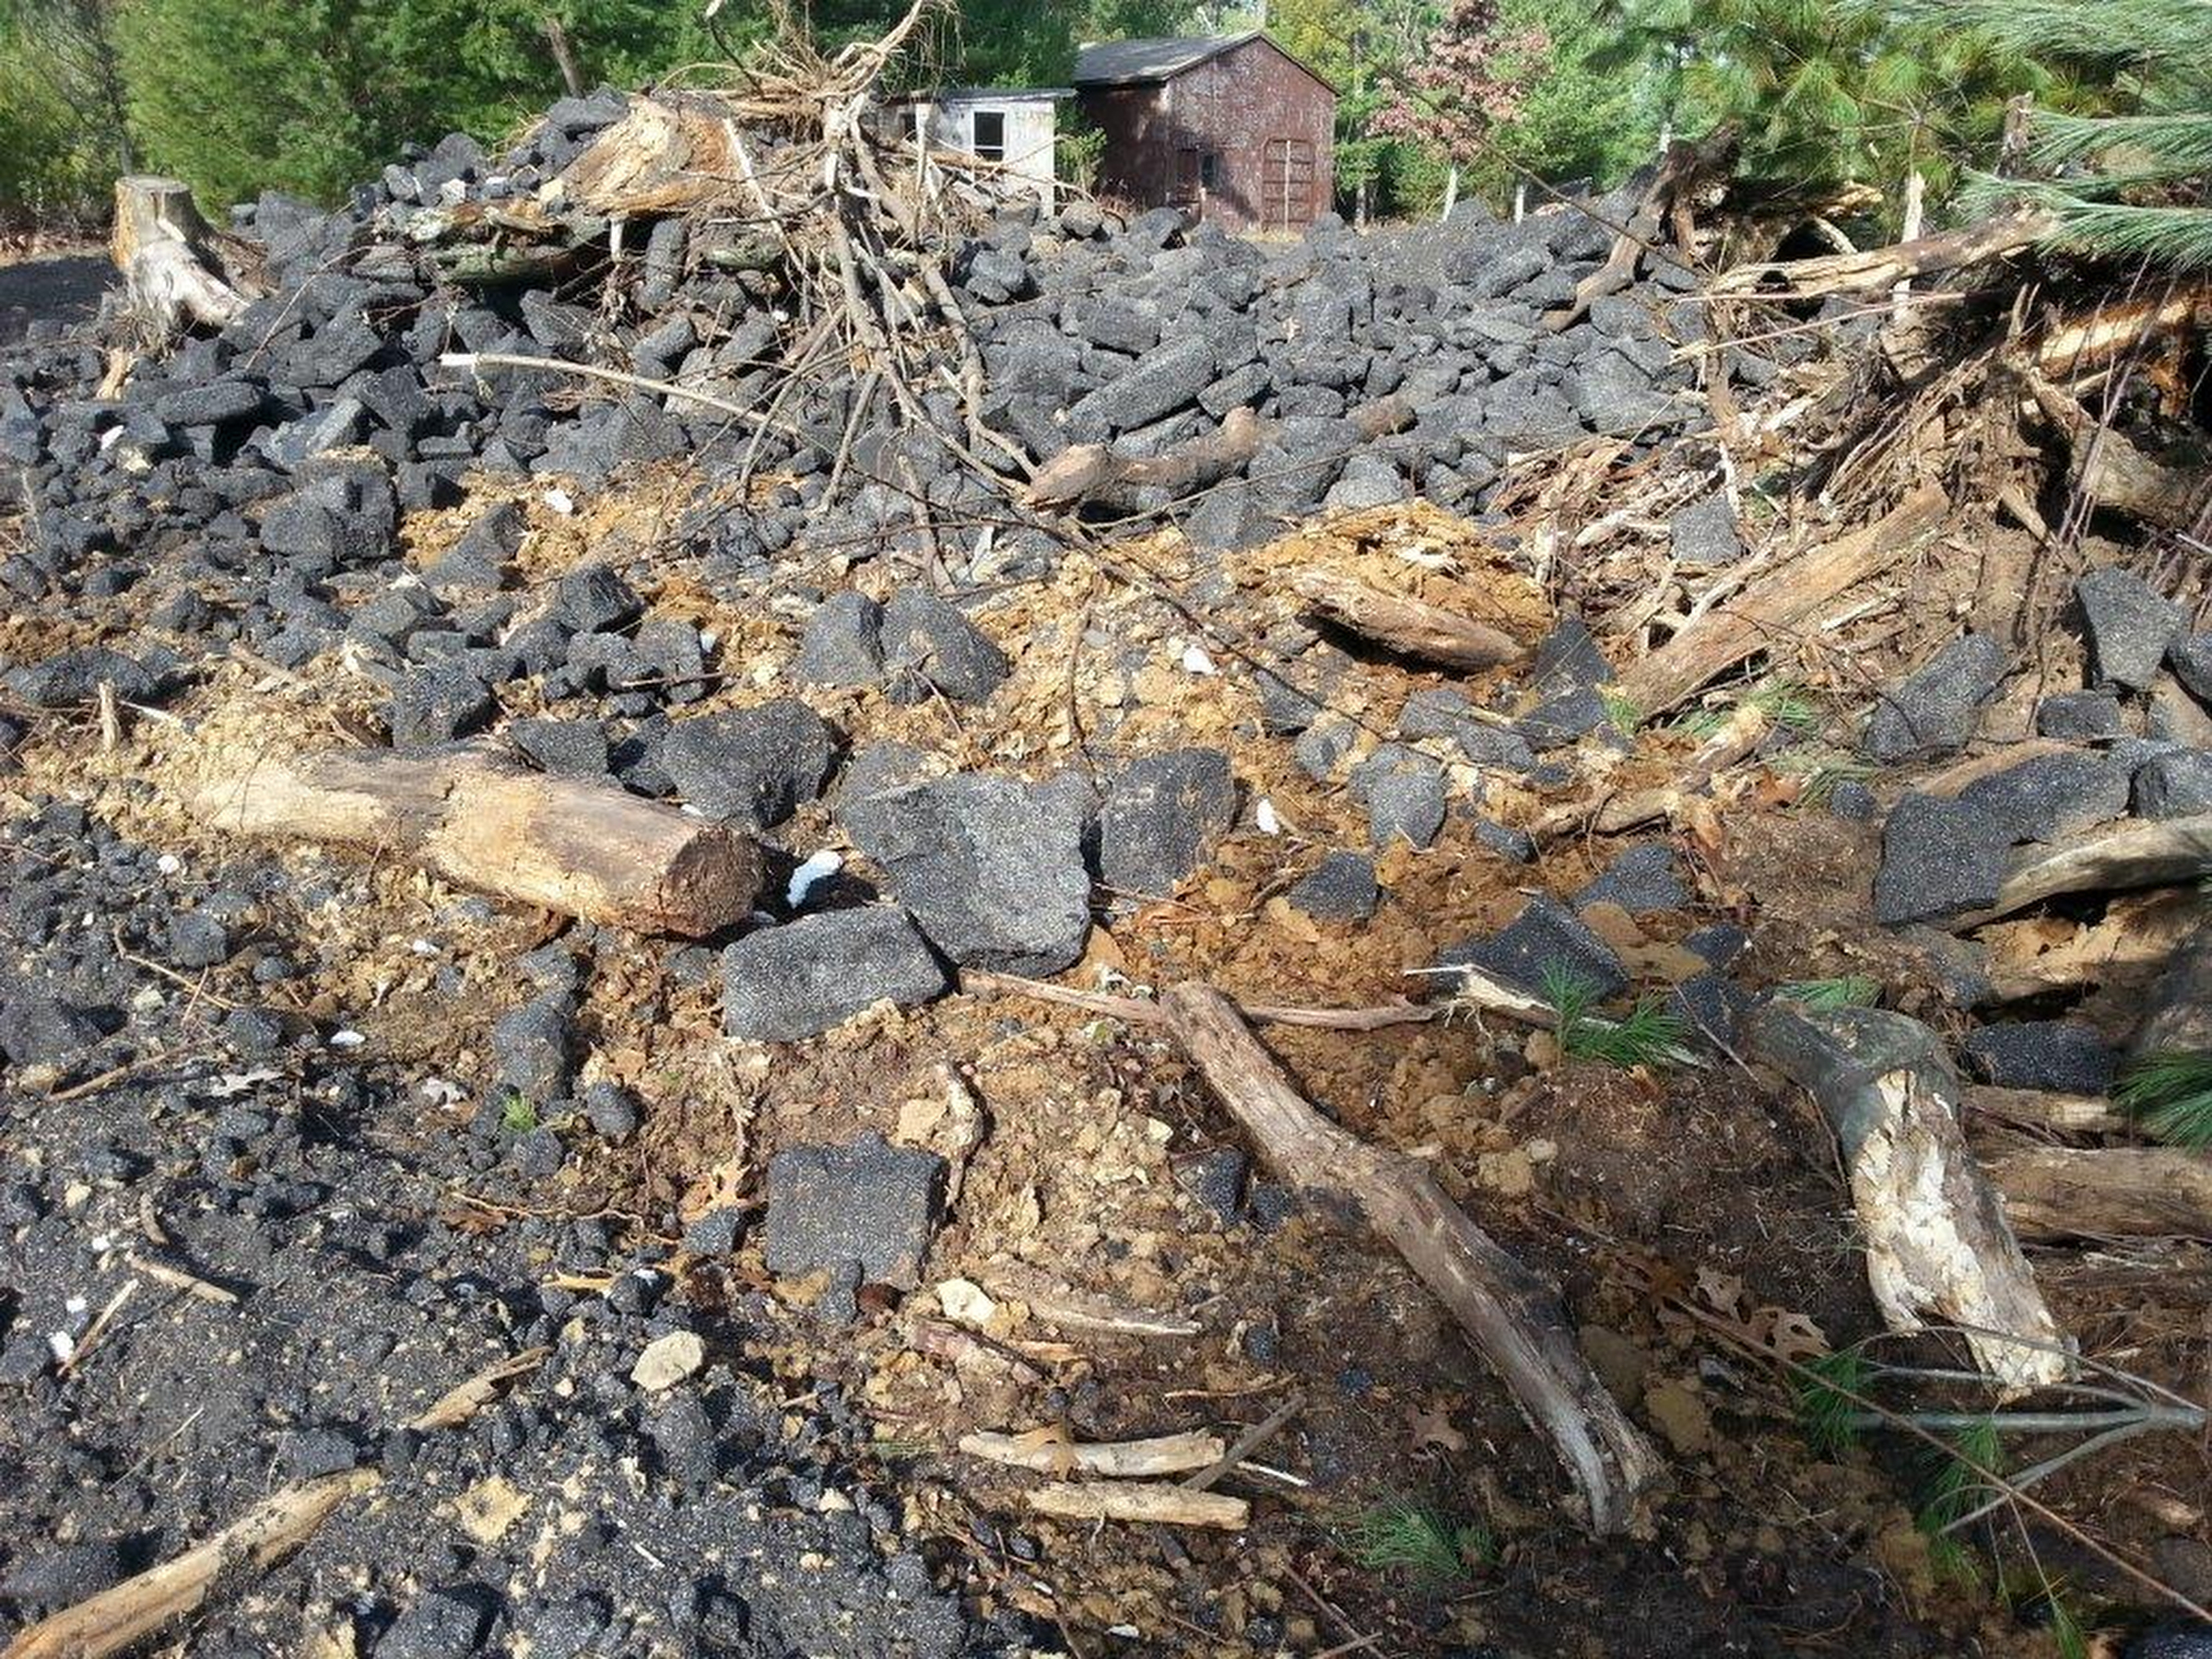 Roofing material is piled up on the Elk Avenue property in Adams County during a DNR inspection in 2015